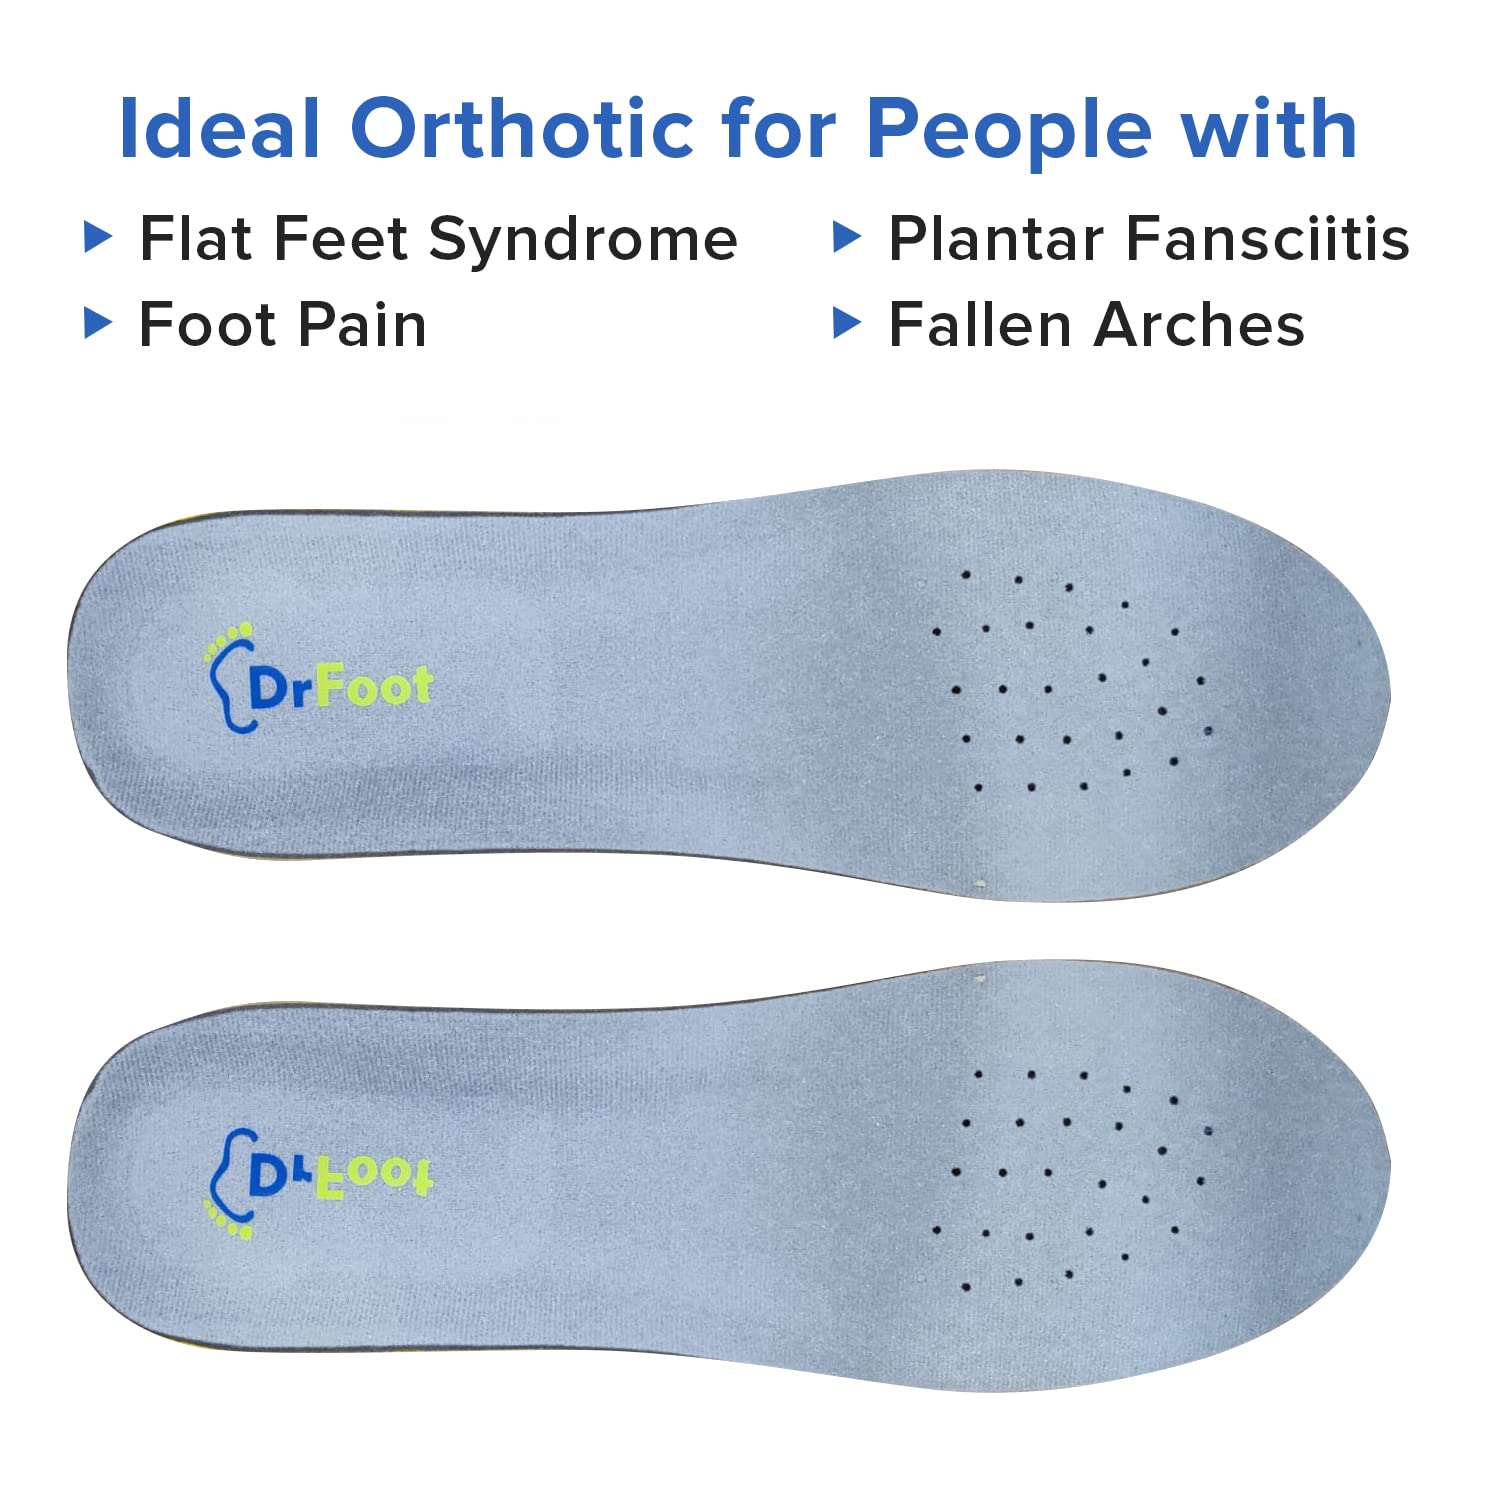 Dr Foot Gel Insoles Pair | For Walking, Running, Sports Shoes | All Day Comfort Shoe Inserts With Dual Gel Technology | Ideal Full-Length Sole For Every Shoe For Unisex- 1 Pair (Size - L) (Pack of 2)